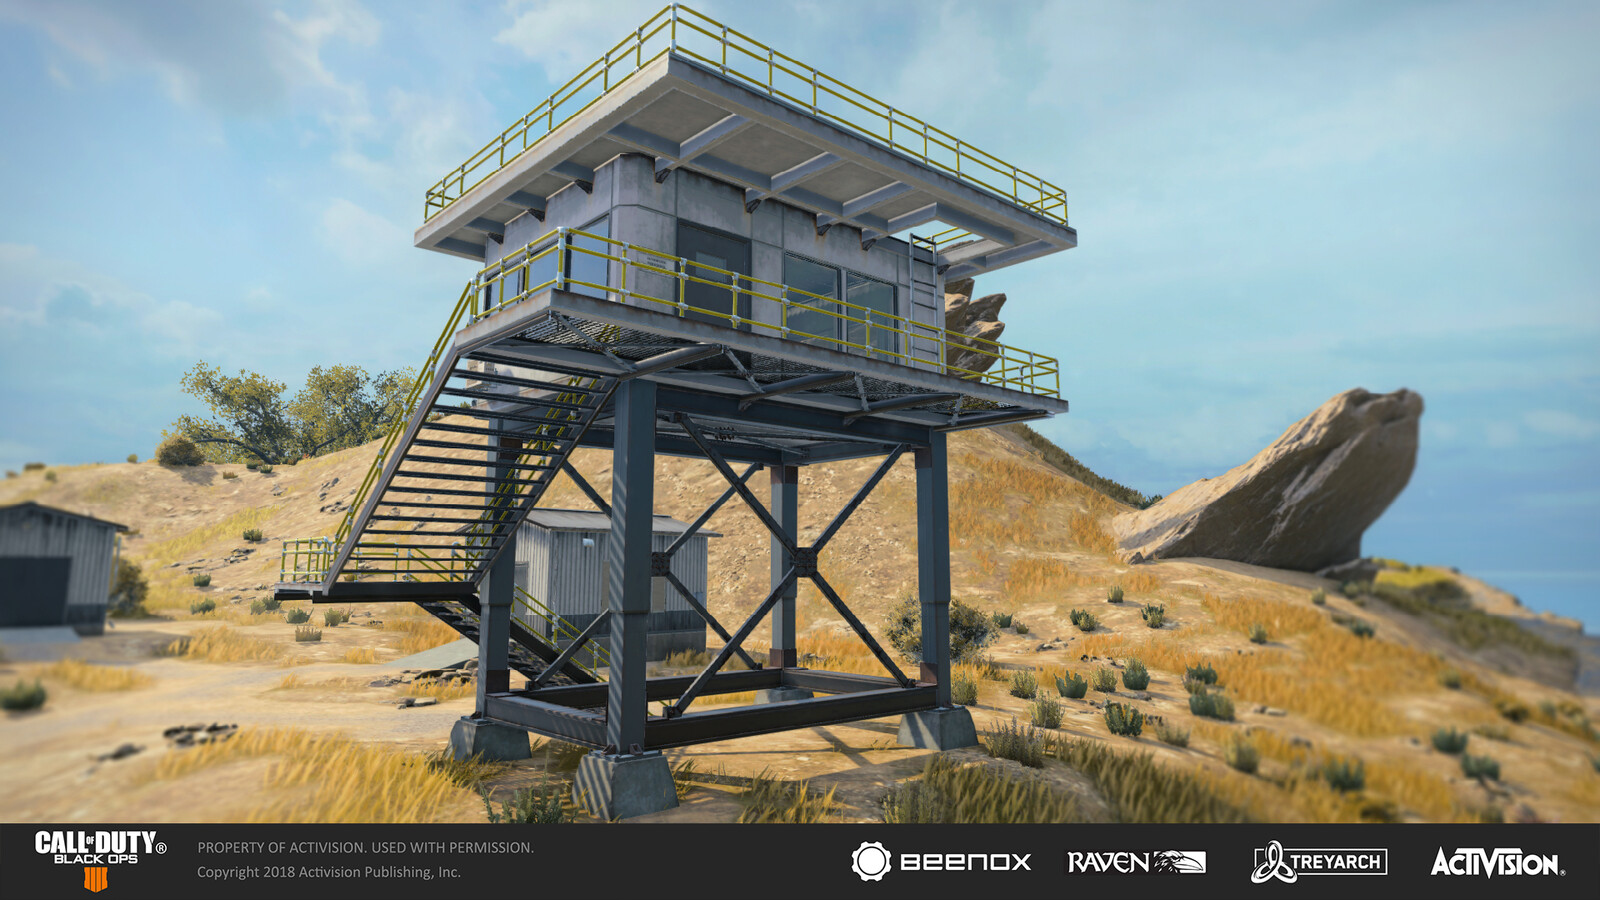 Responsible for Guard Tower in-editor world geo, texture application and blending using pre-existing materials, and set dress using pre-existing models while following provided art direction, reference, and concept art